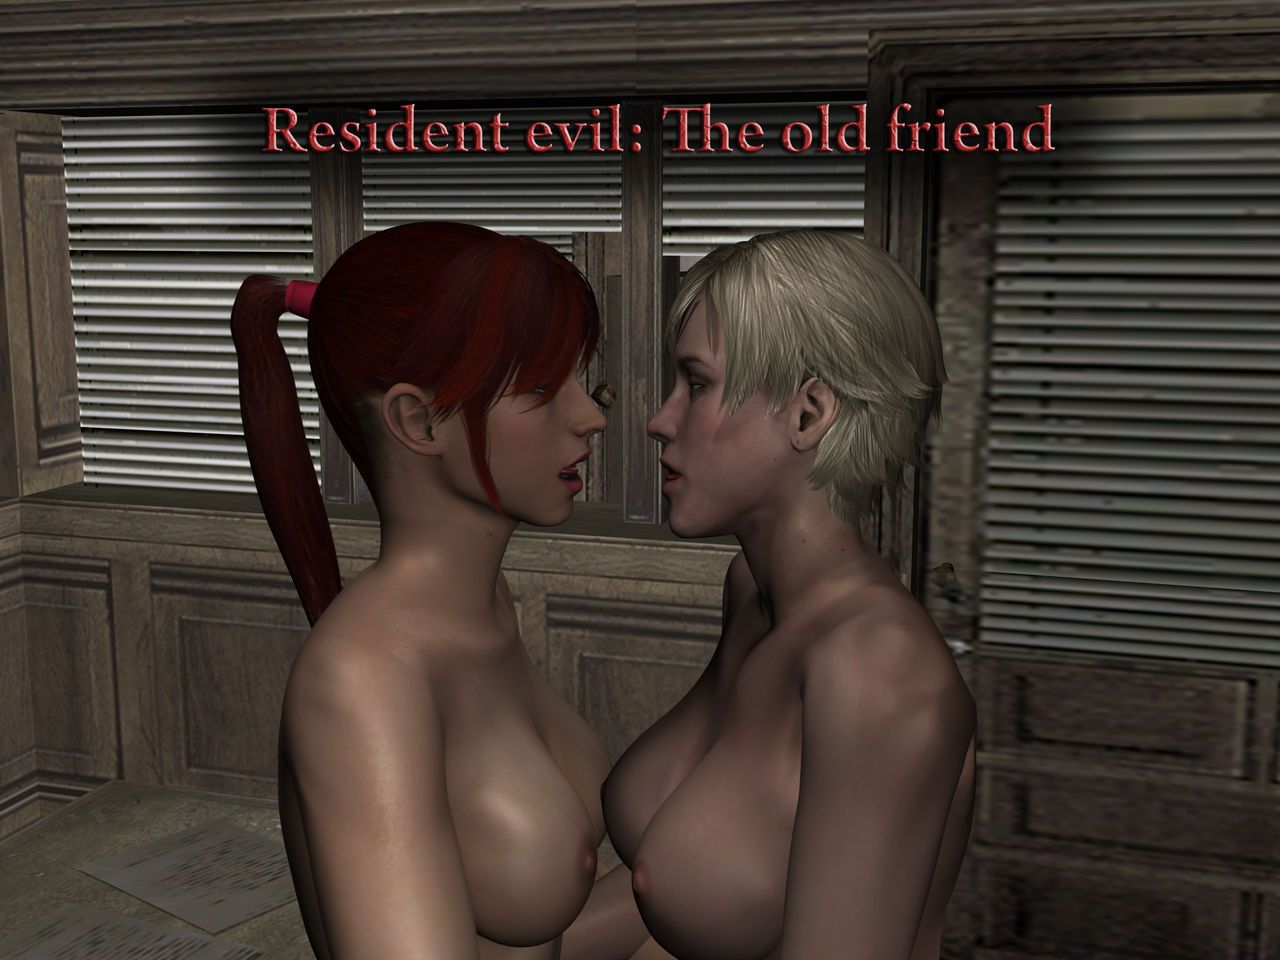 Resident evil: The old friend 1